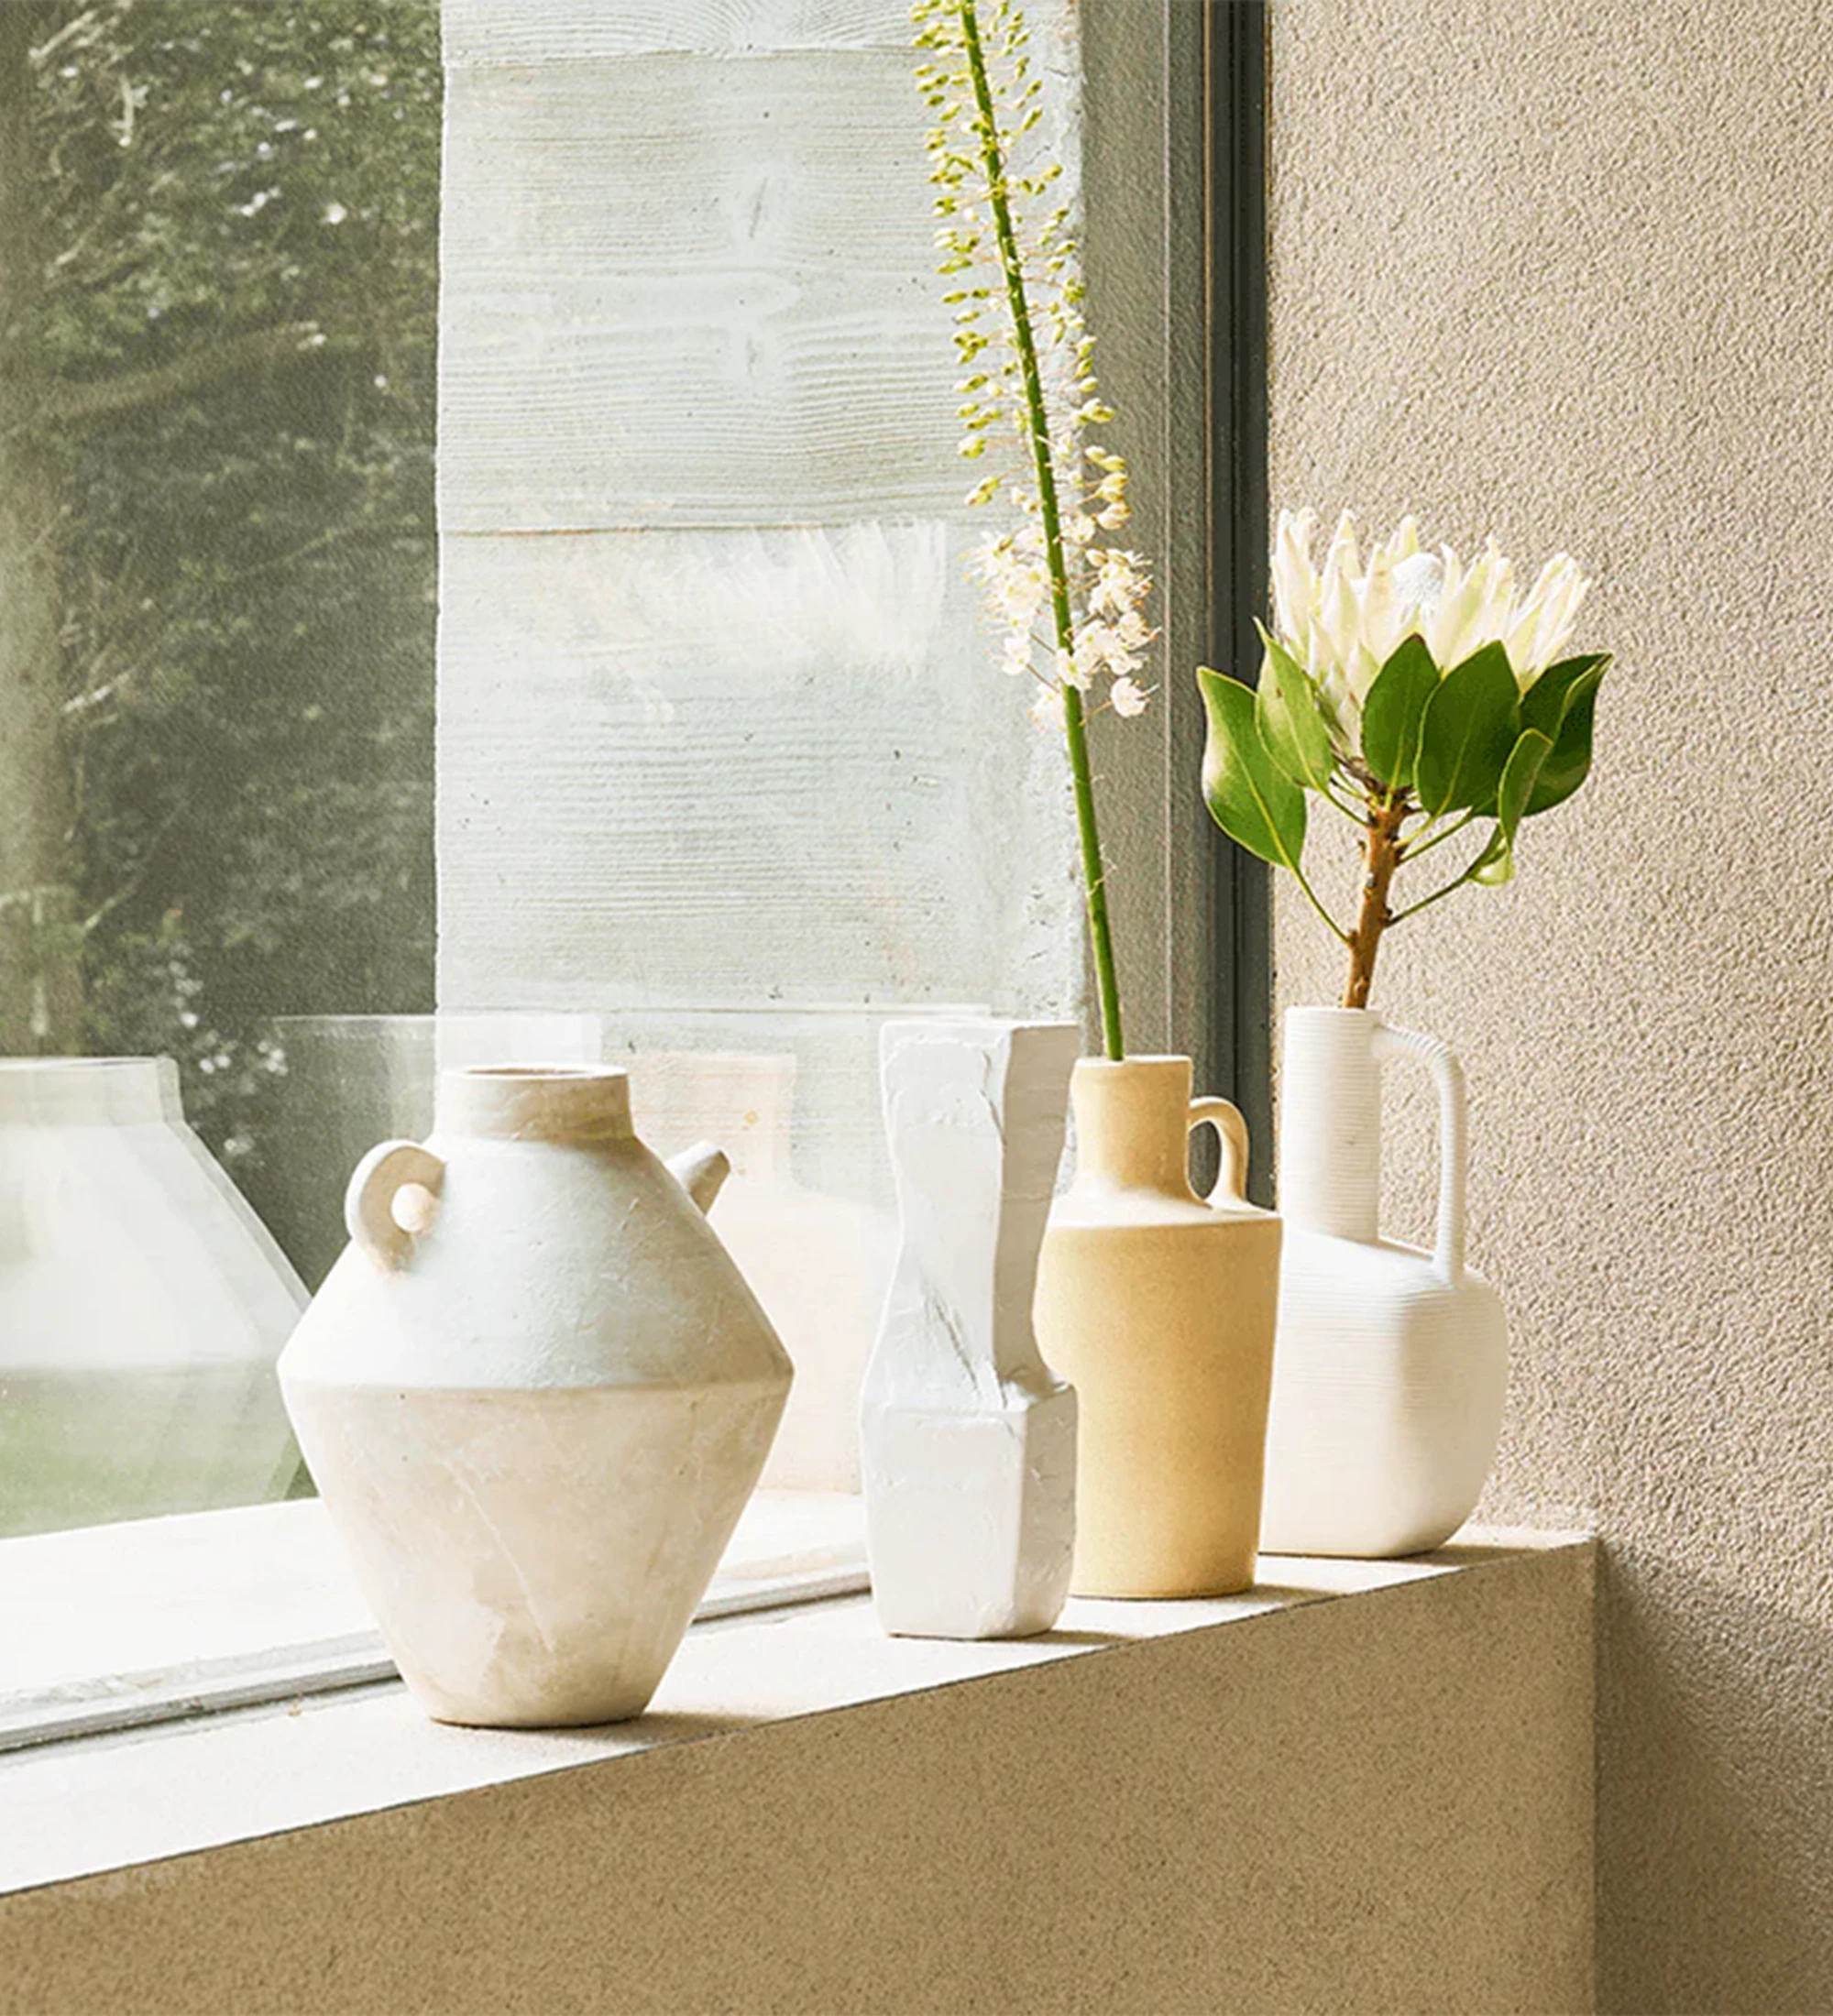 Handmade vase, with ceramic structure covered with slightly glossy enamel in light khaki, made in Portugal.